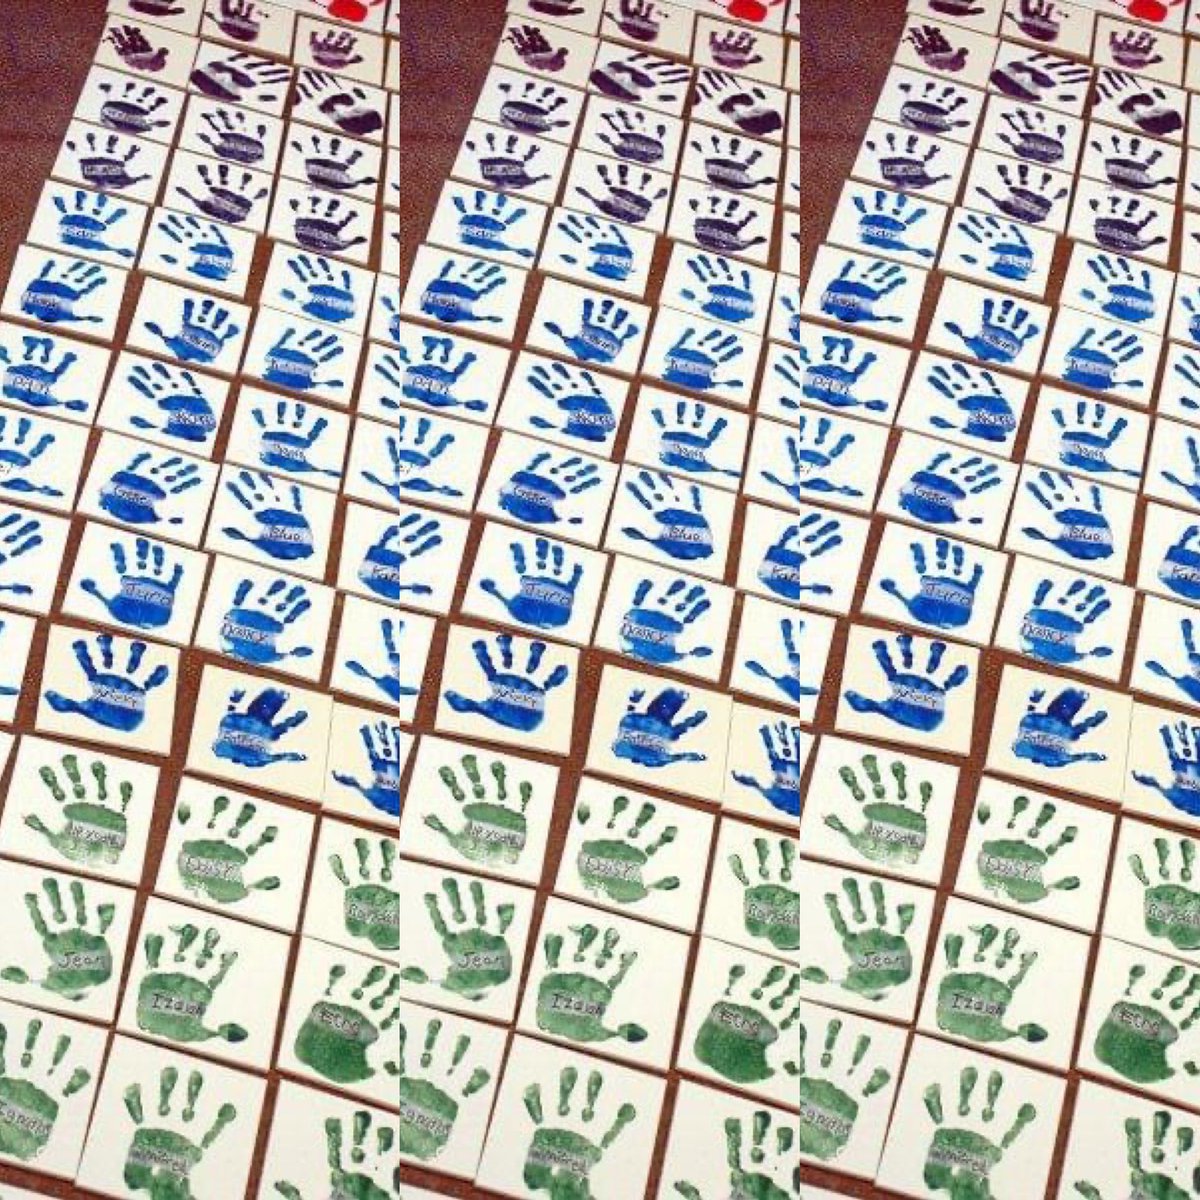 April is #childabusepreventionmonth I did this handprint project for a human rights exhibit several years ago - PreK students created the handprints & 2nd graders named them. It showed the total number of deaths in a one month period. 151 children die monthly due to neglect/abuse